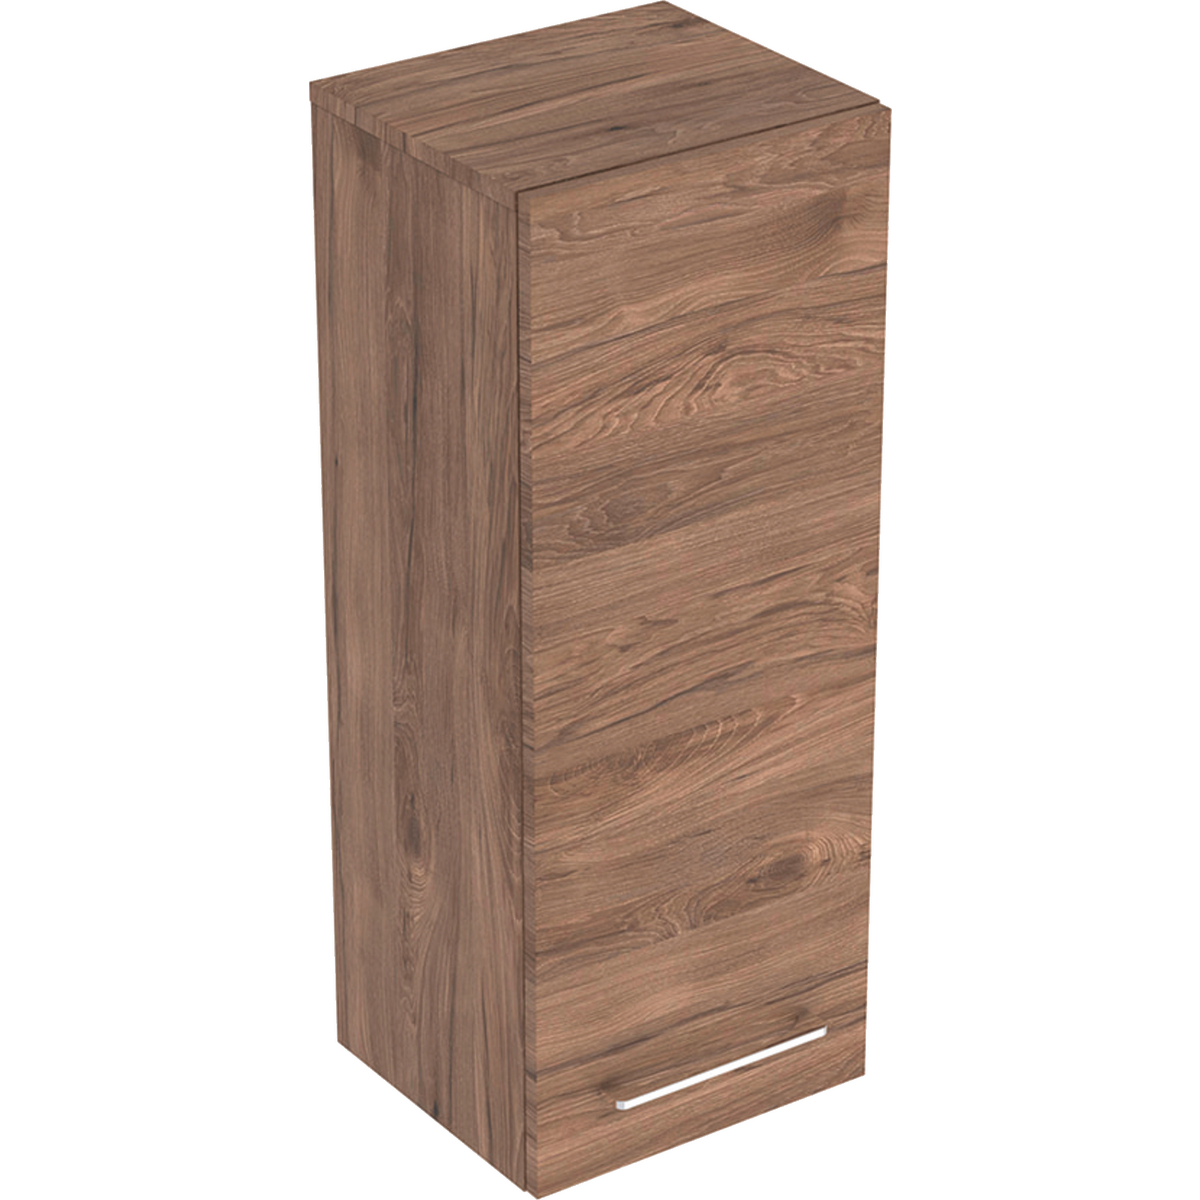 Geberit 501278001 Square S Medium Cabinet with One Door - Hickory